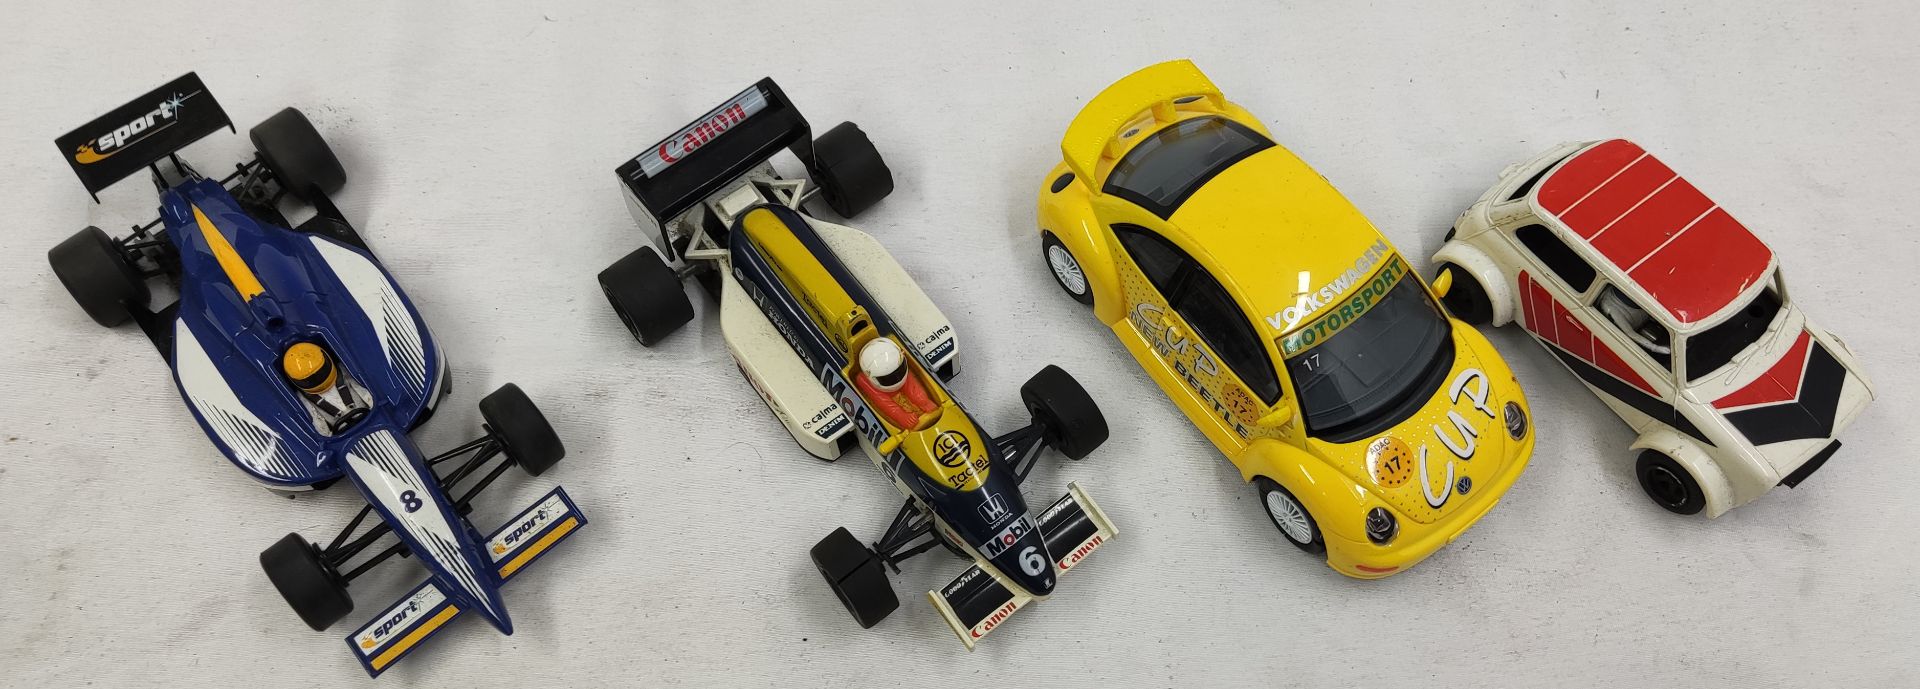 4 x Scalextric Cars Including VW Beetle, F1 Car, Open Wheeler and Mini Clubman 1275GT - Tested and - Image 9 of 11